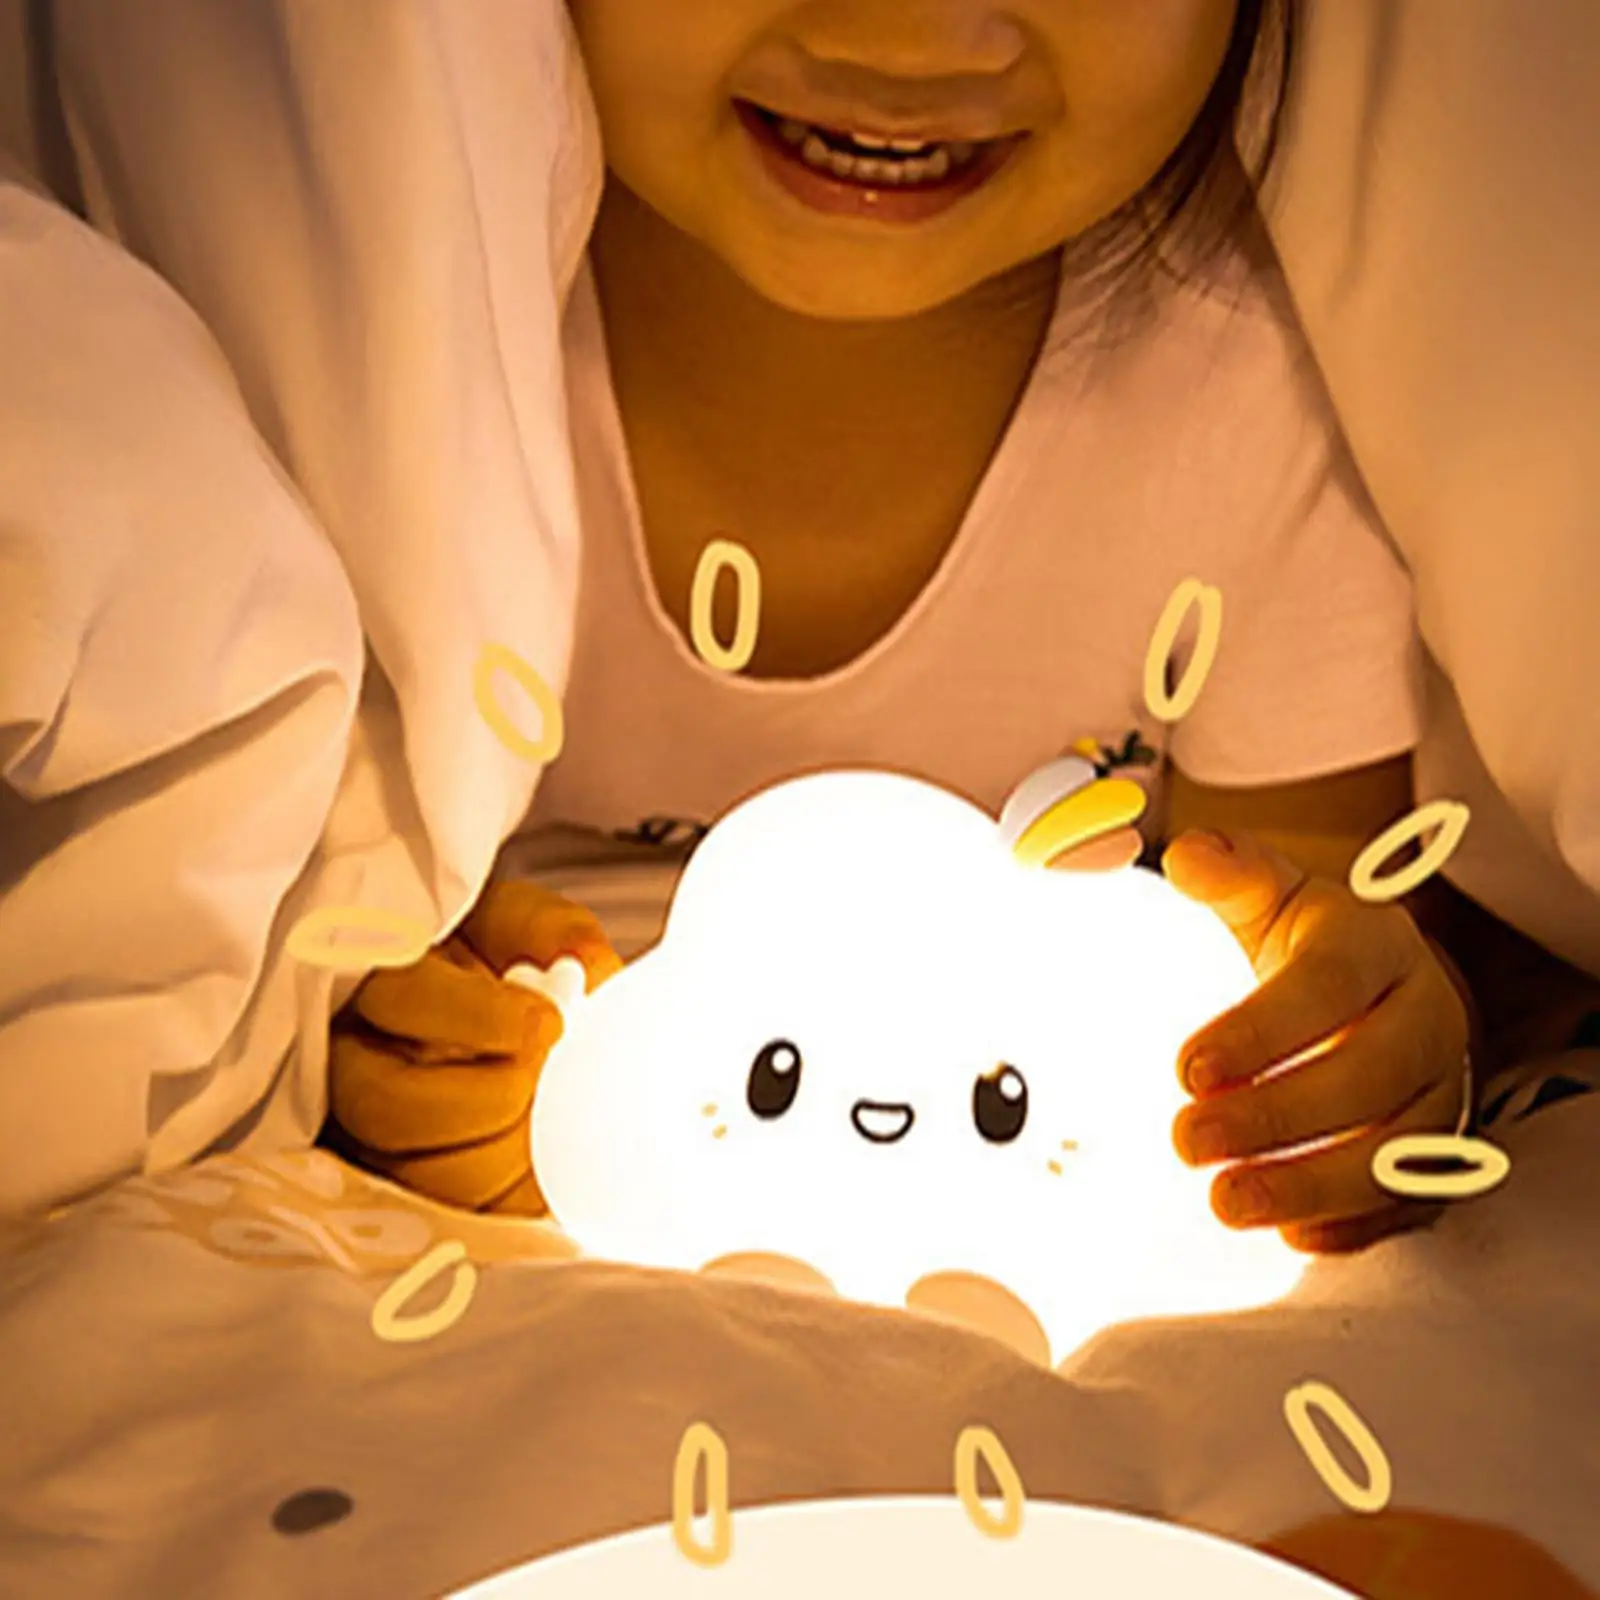 Cute LED Silicone Night Light USB Warm Light Dimmable Color Changing Lighting for Camping Sleeping Kids NightStand Bedside